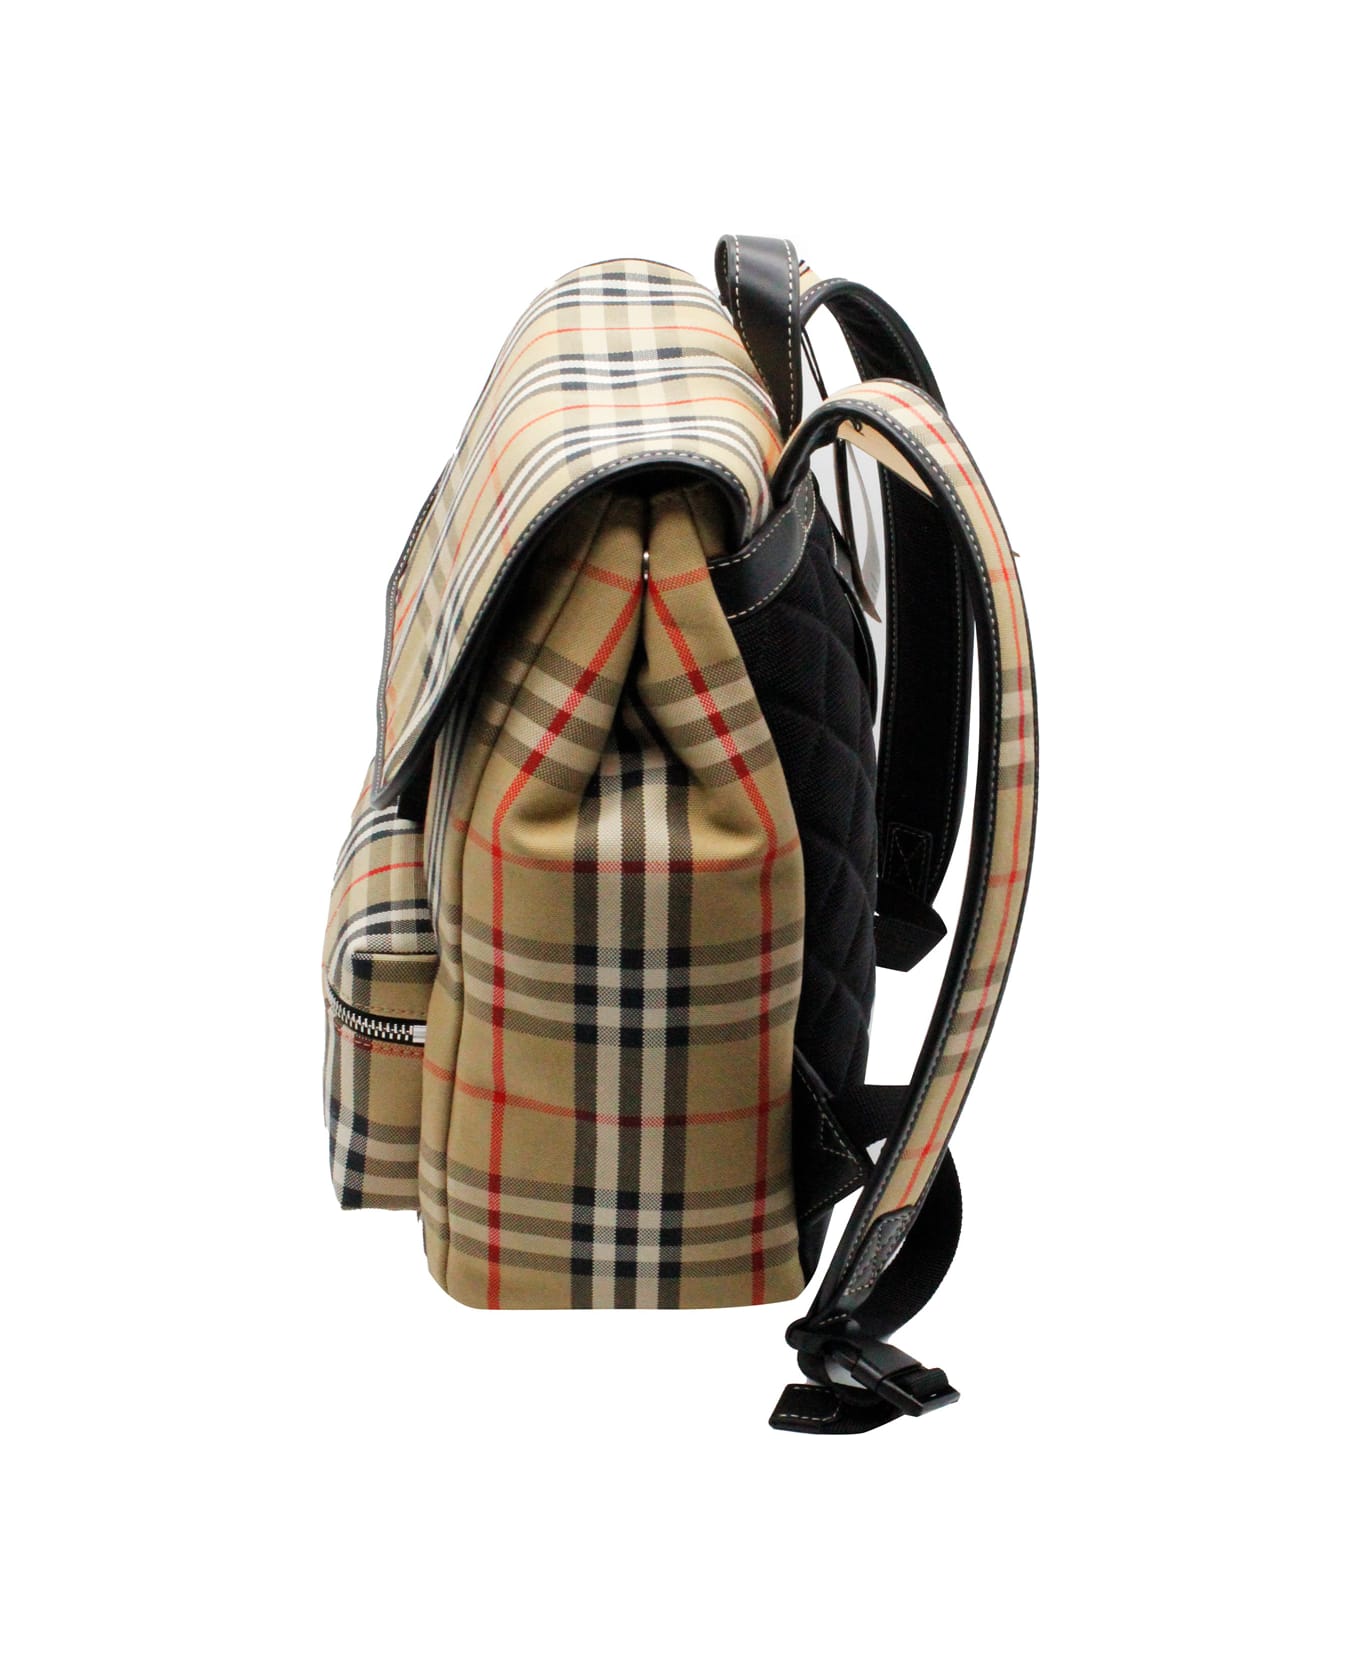 Burberry Backpack In Organic Cotton Fabric With Vintage Check Motif With Adjustable Shoulder Straps. - Beige アクセサリー＆ギフト